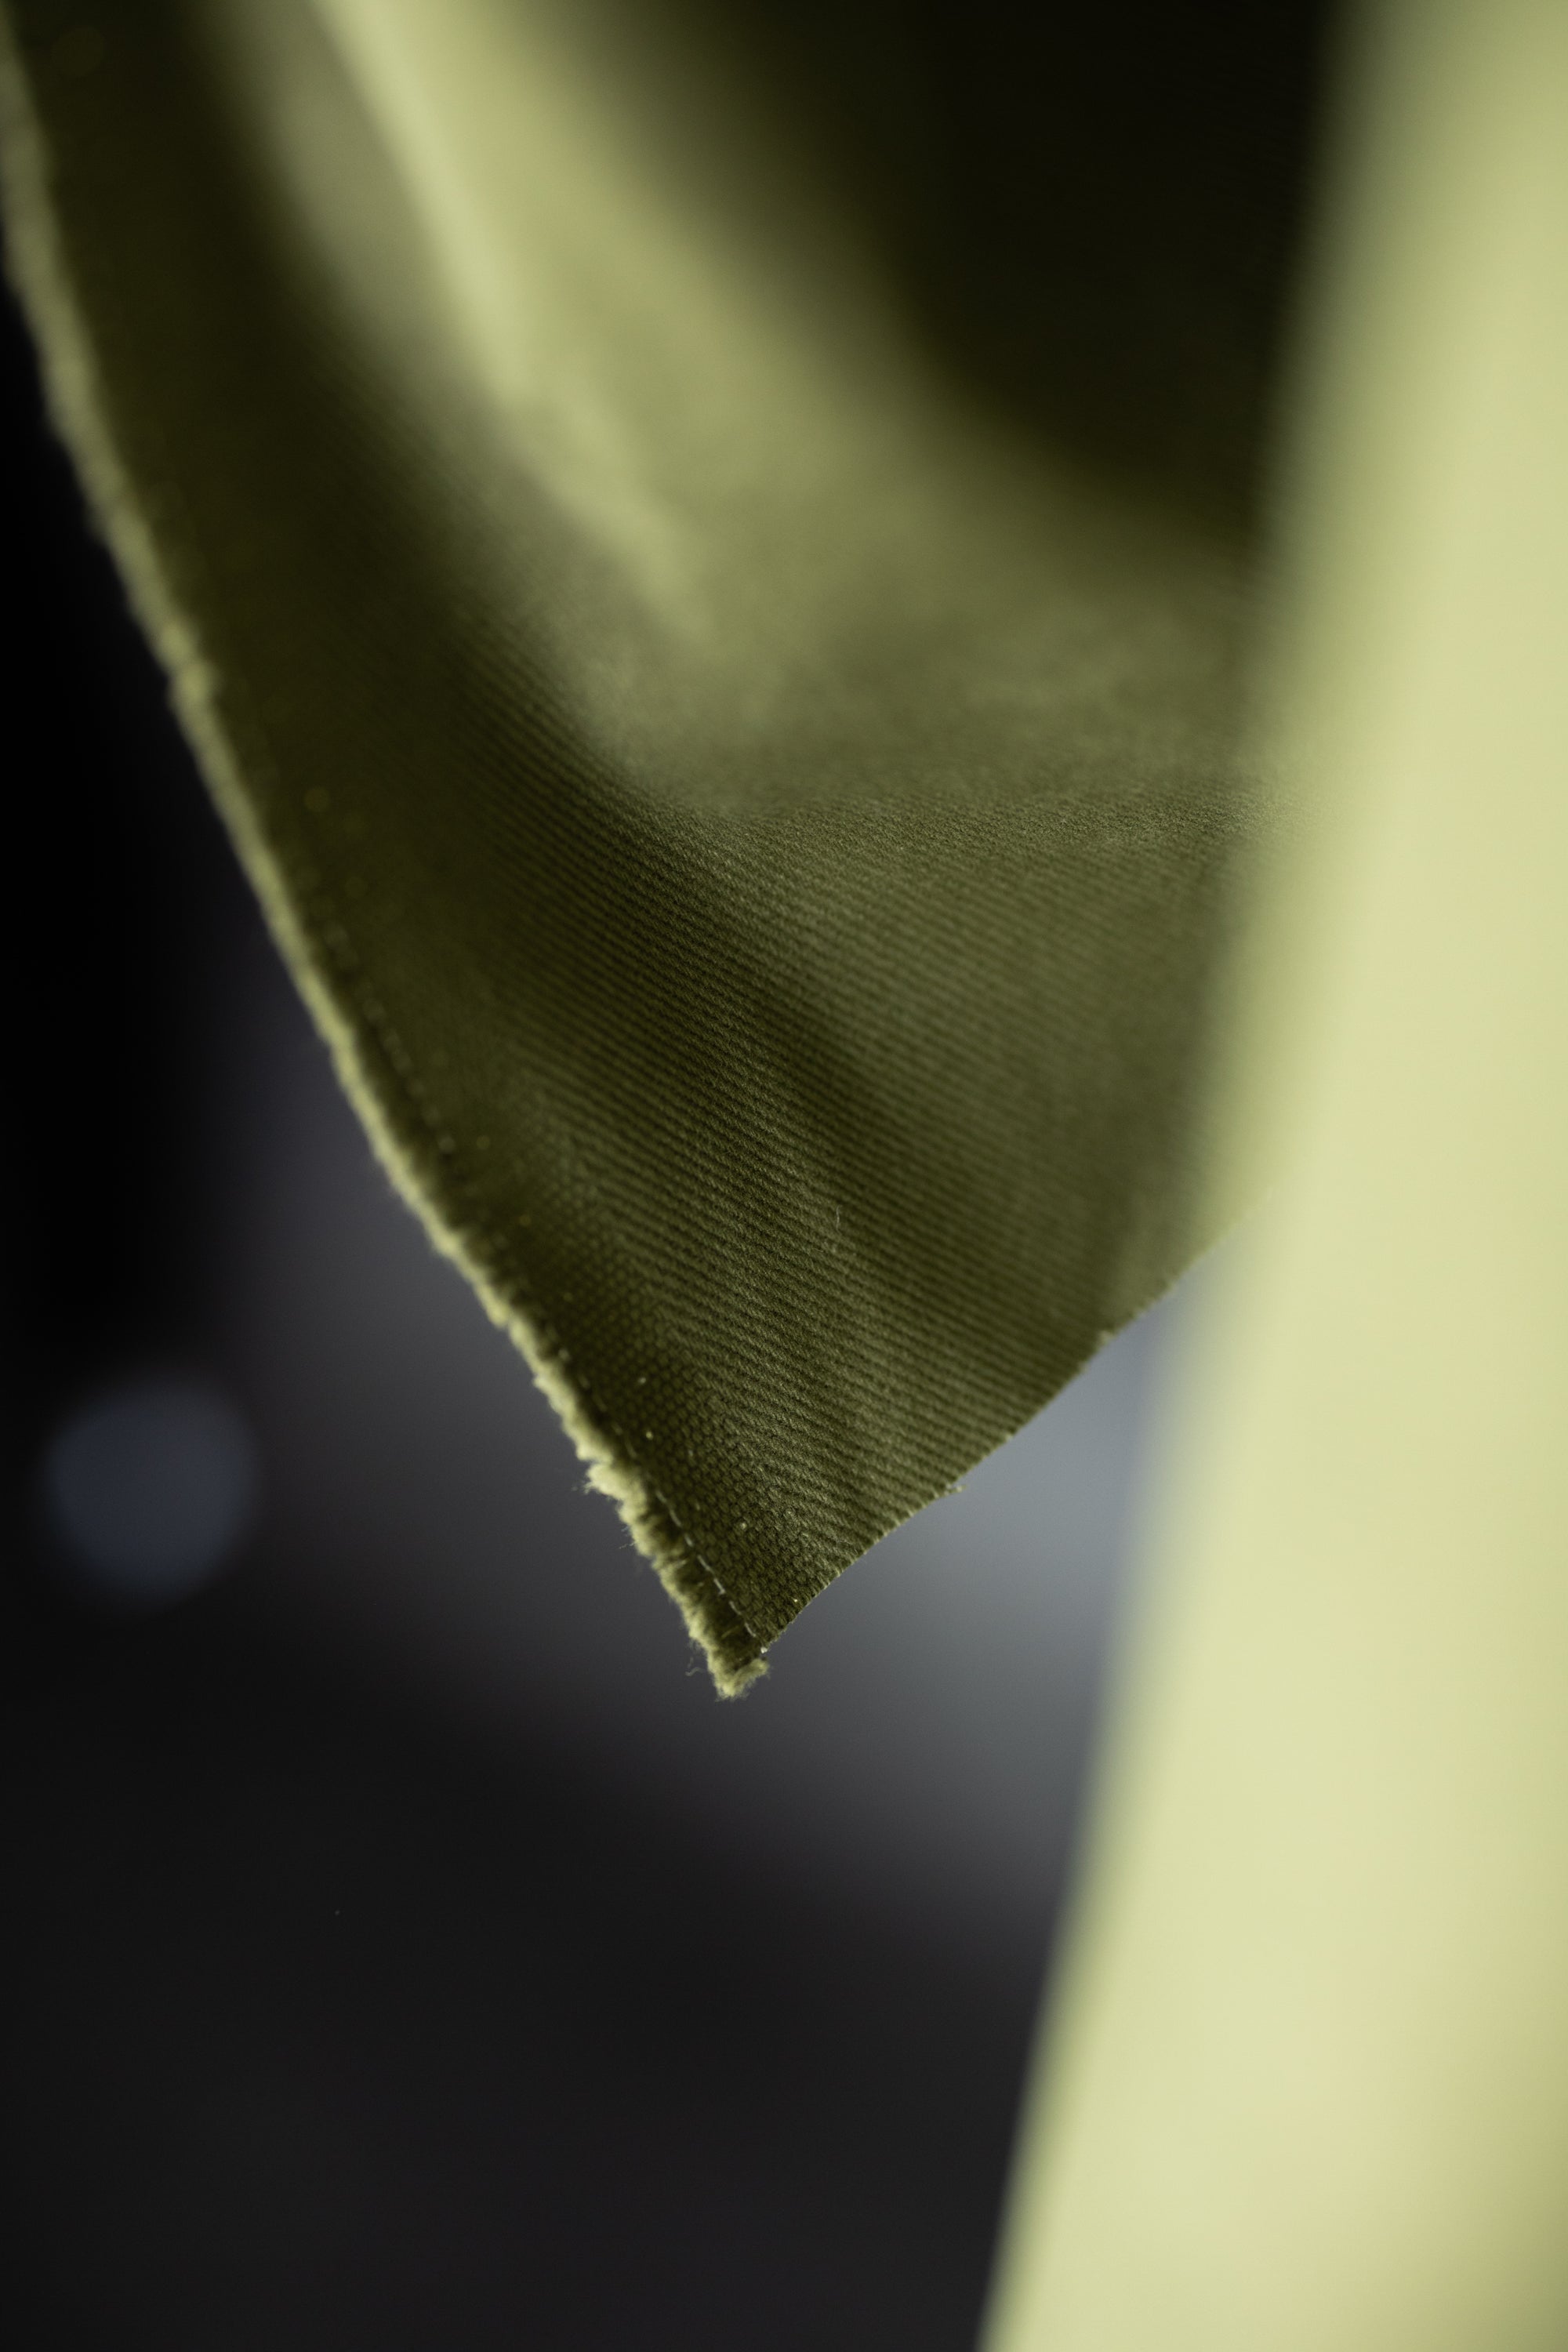 close up 12 oz sanded twill fabric in a spring green on a dark grey background.